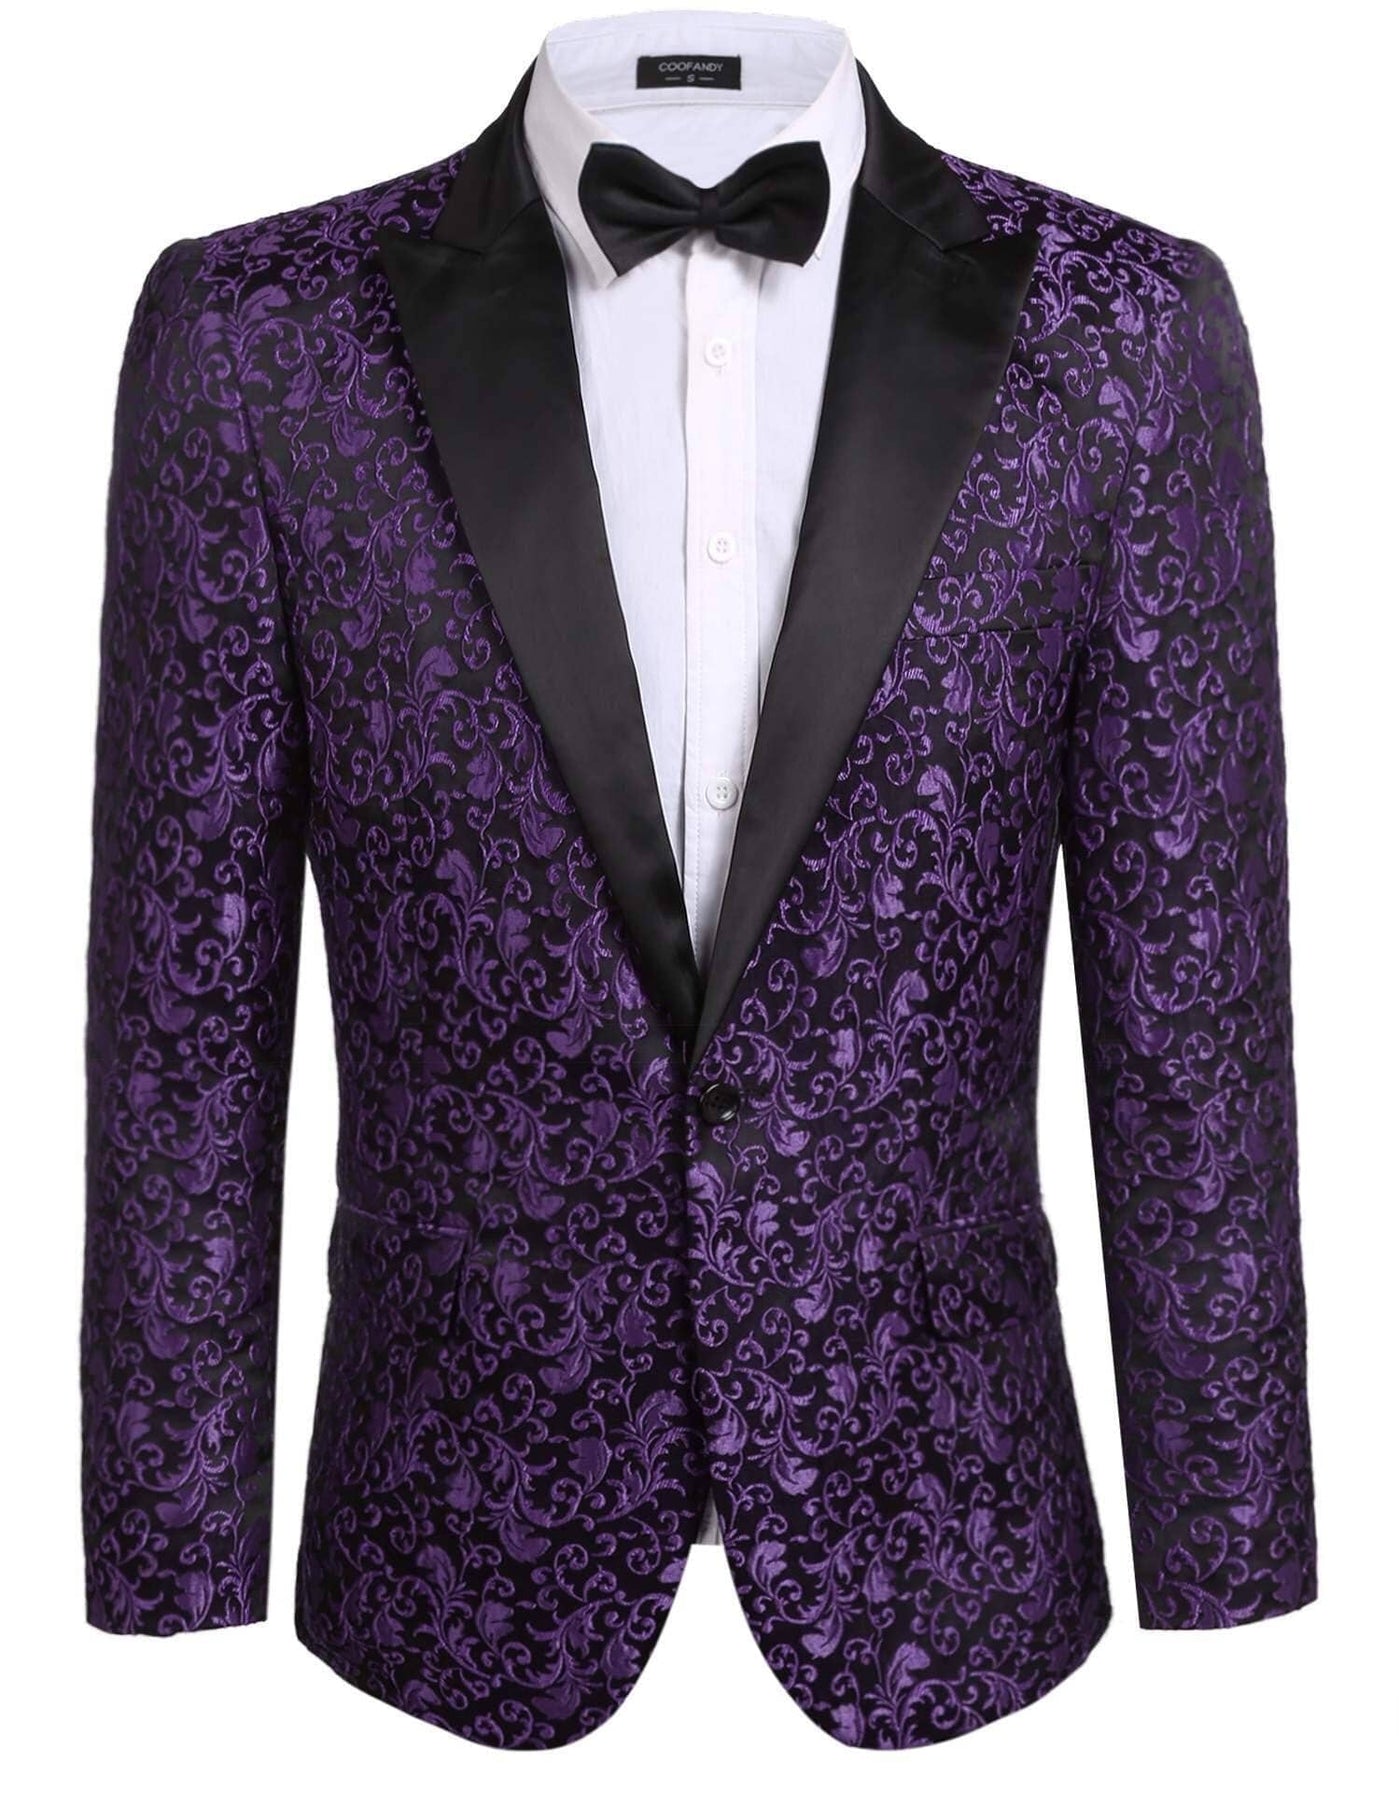 Coofandy Floral Party Tuxedo (US Only) Blazer coofandy Purple XS 